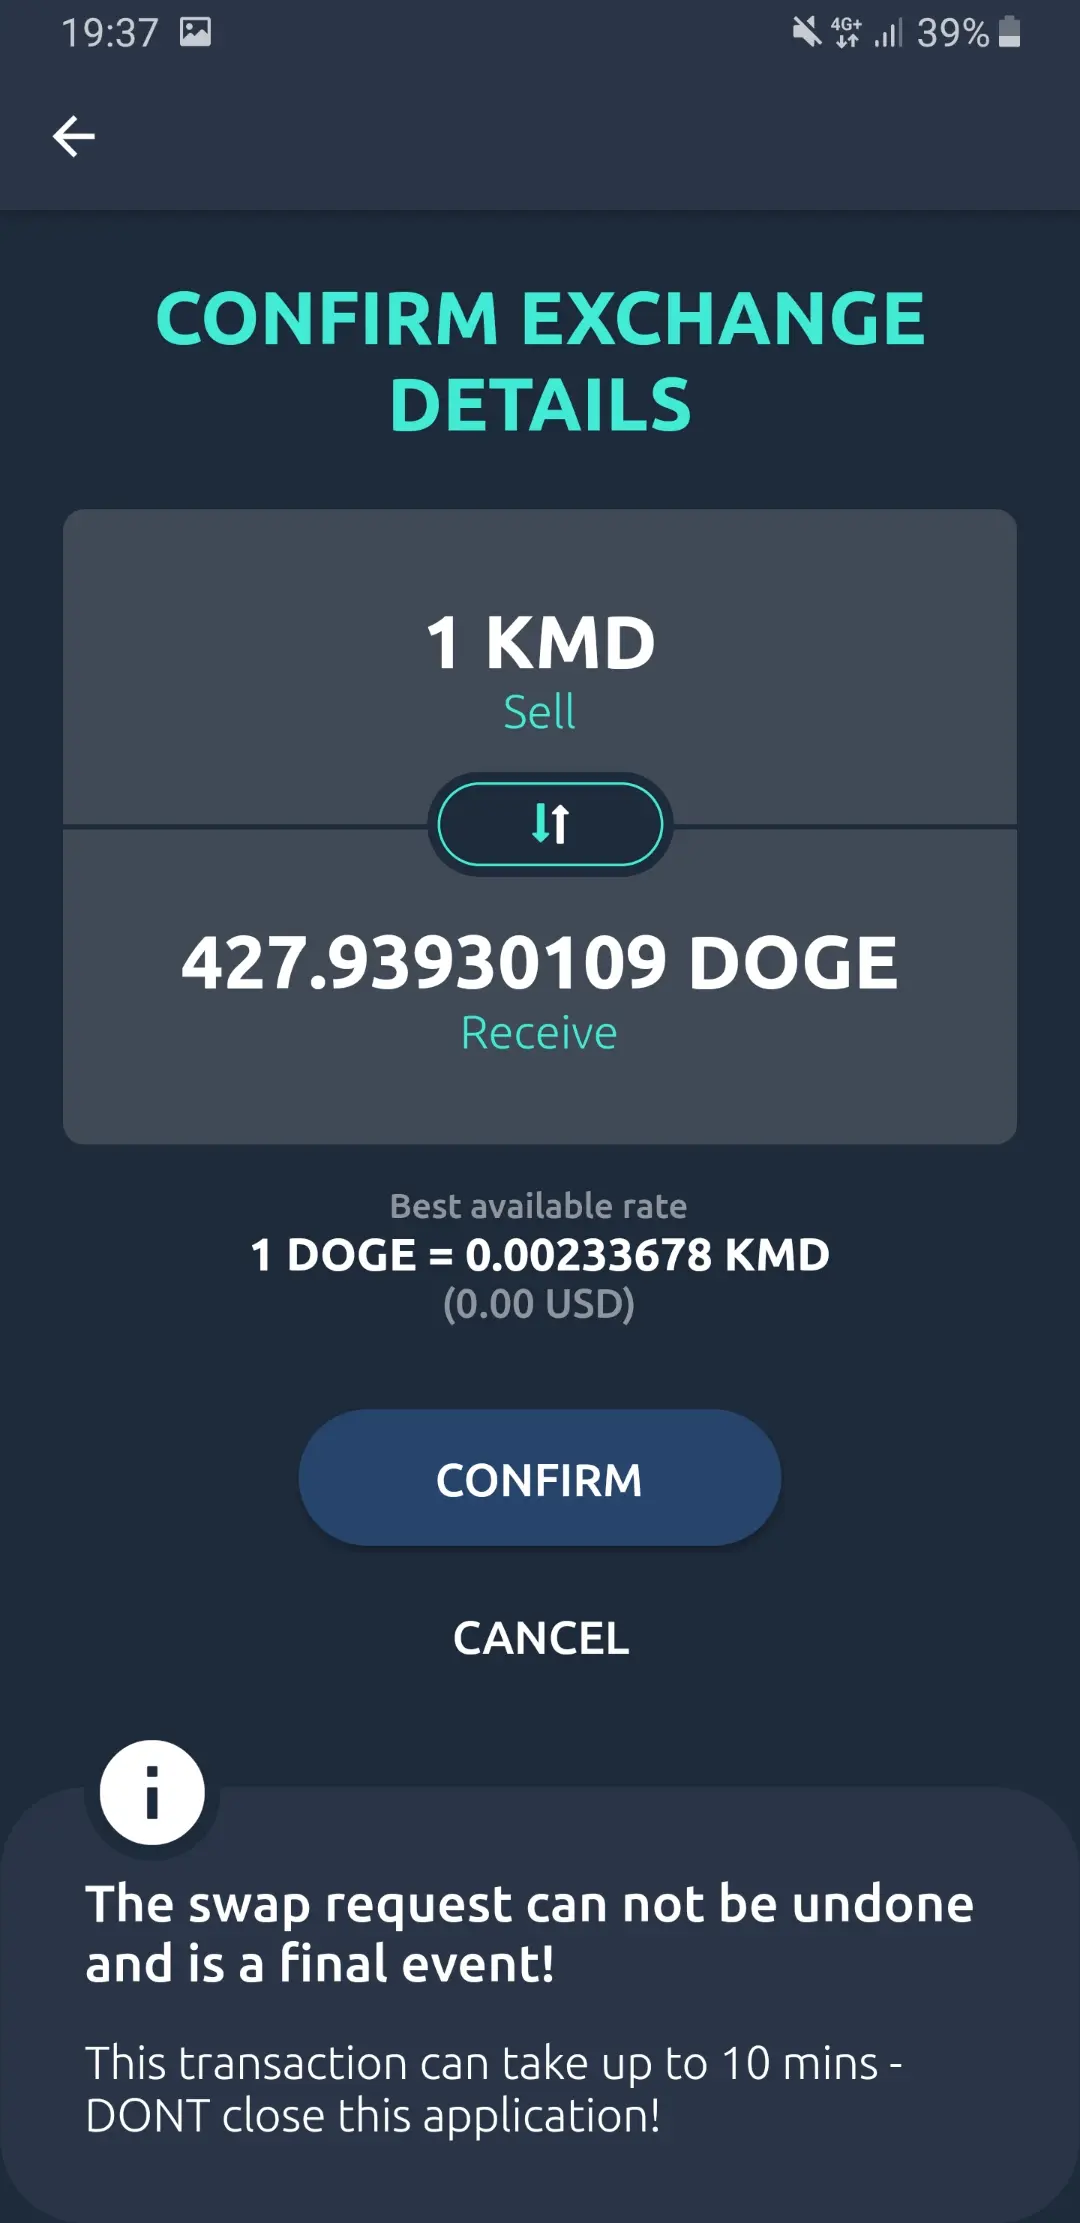 How to Perform Cross-Chain Atomic Swaps Using Komodo Mobile Wallet